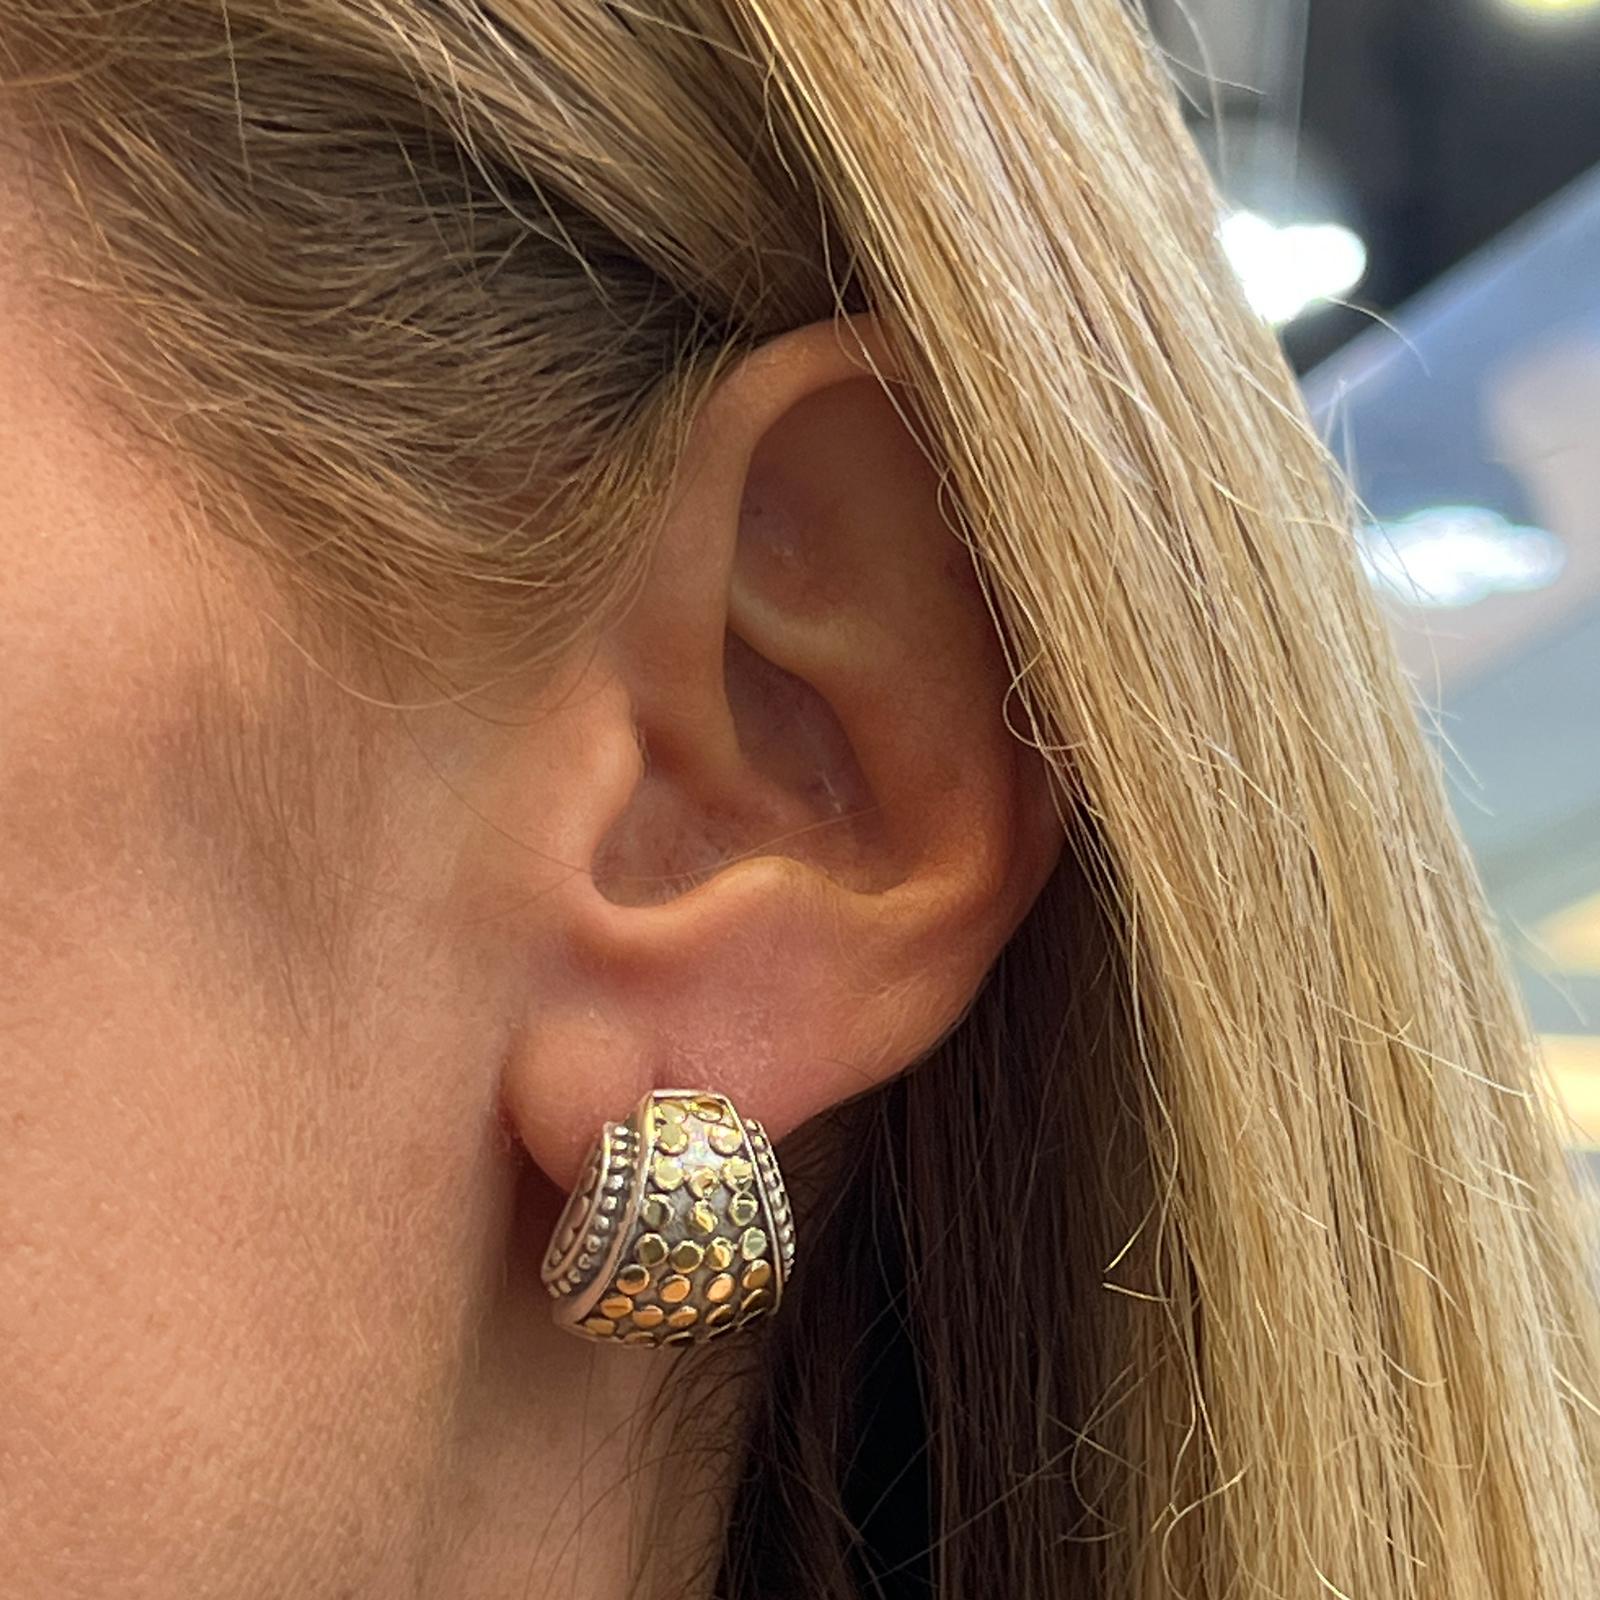 John Hardy earrings, from the Dot Collection, fashioned in 18 karat yellow gold and sterling silver. The lightweight earrings are great for everyday measuring .60 x .60 inches with lever-backs. Signed JH 18k 925.